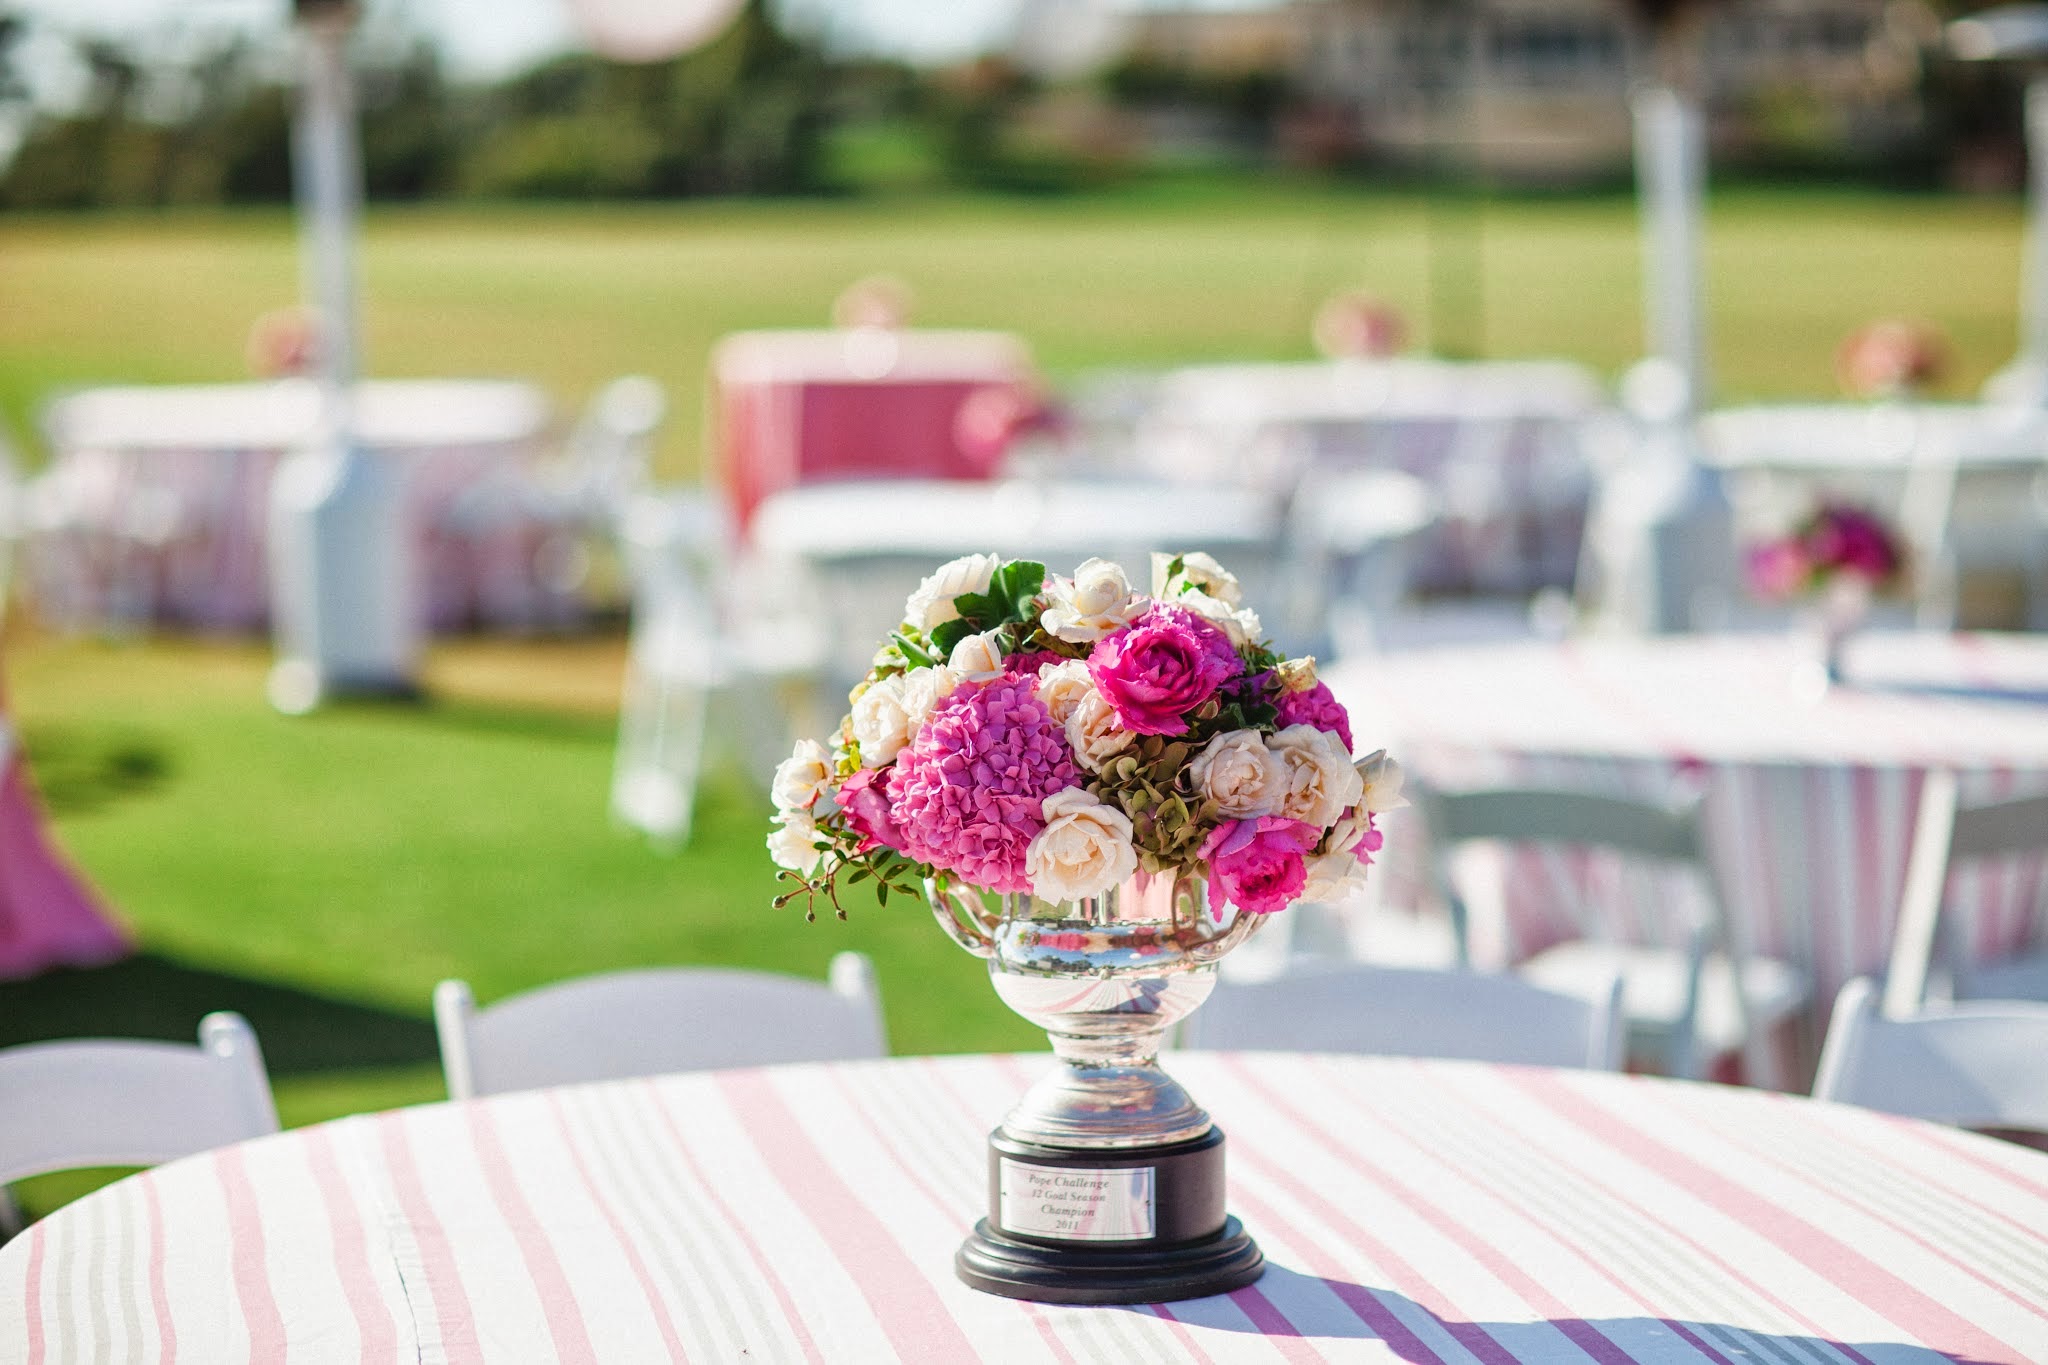 www.FeliciEvents | Pink Polo Party | Funraising Event | Felici Fundraiser | Polo Theme | Clarissa Koenig Photography | Pink Decor